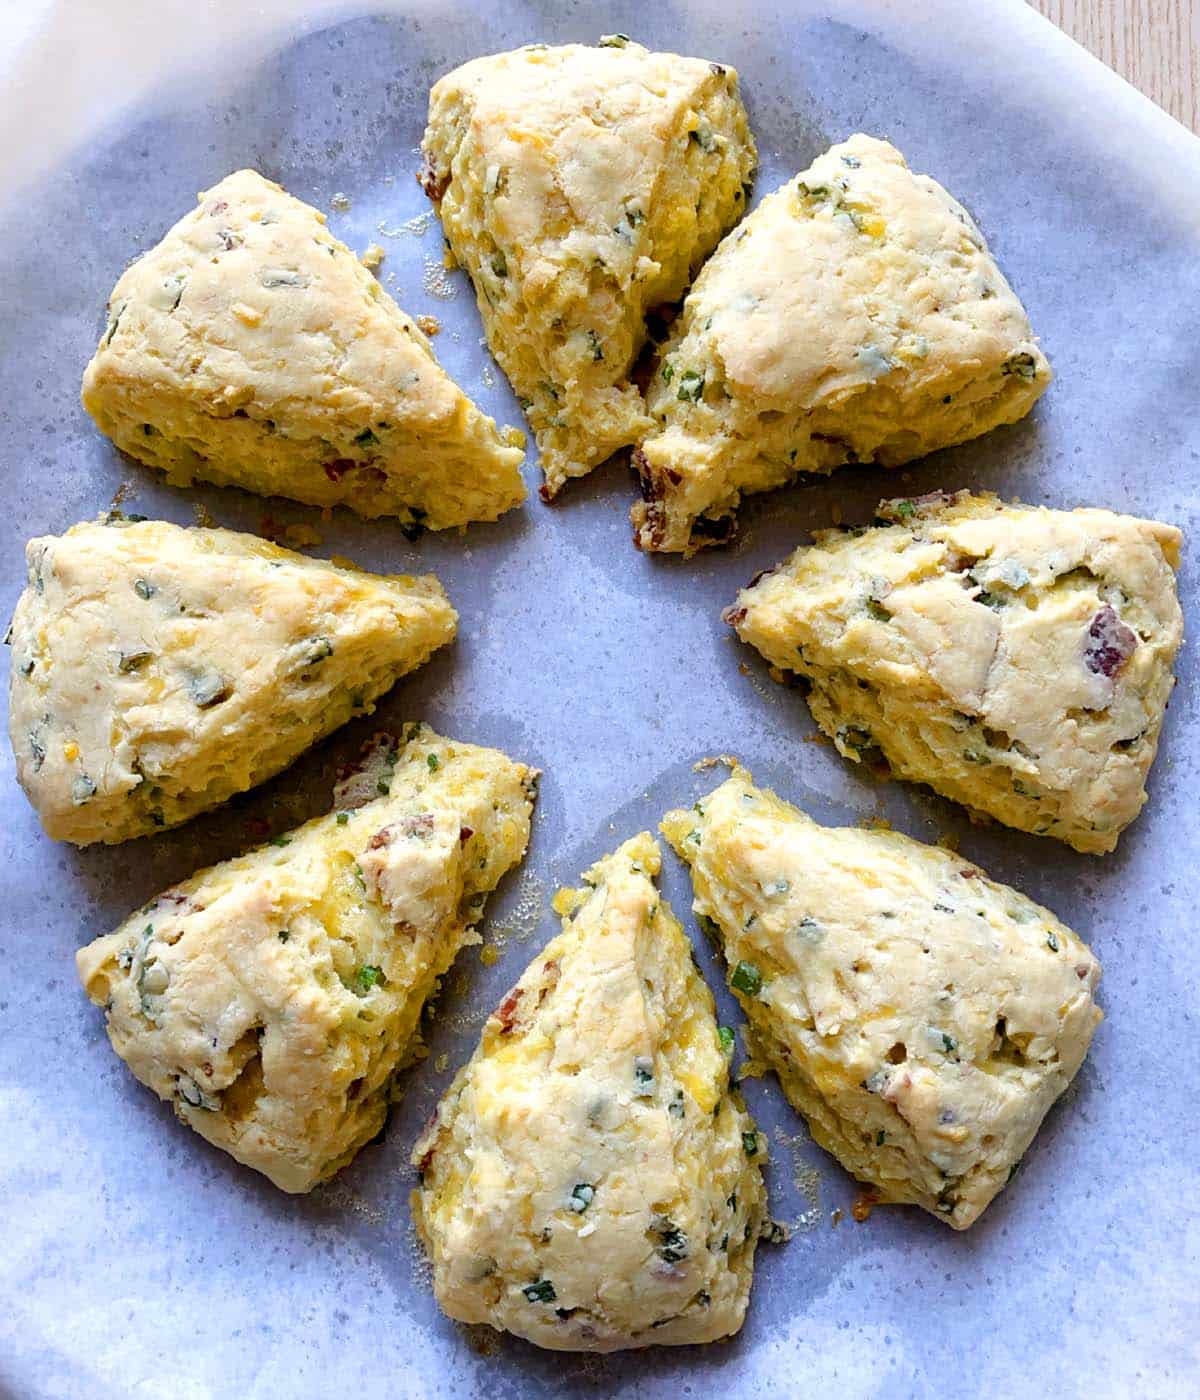 Baked bacon cheddar scallion scones on a white paper lined baking sheet.